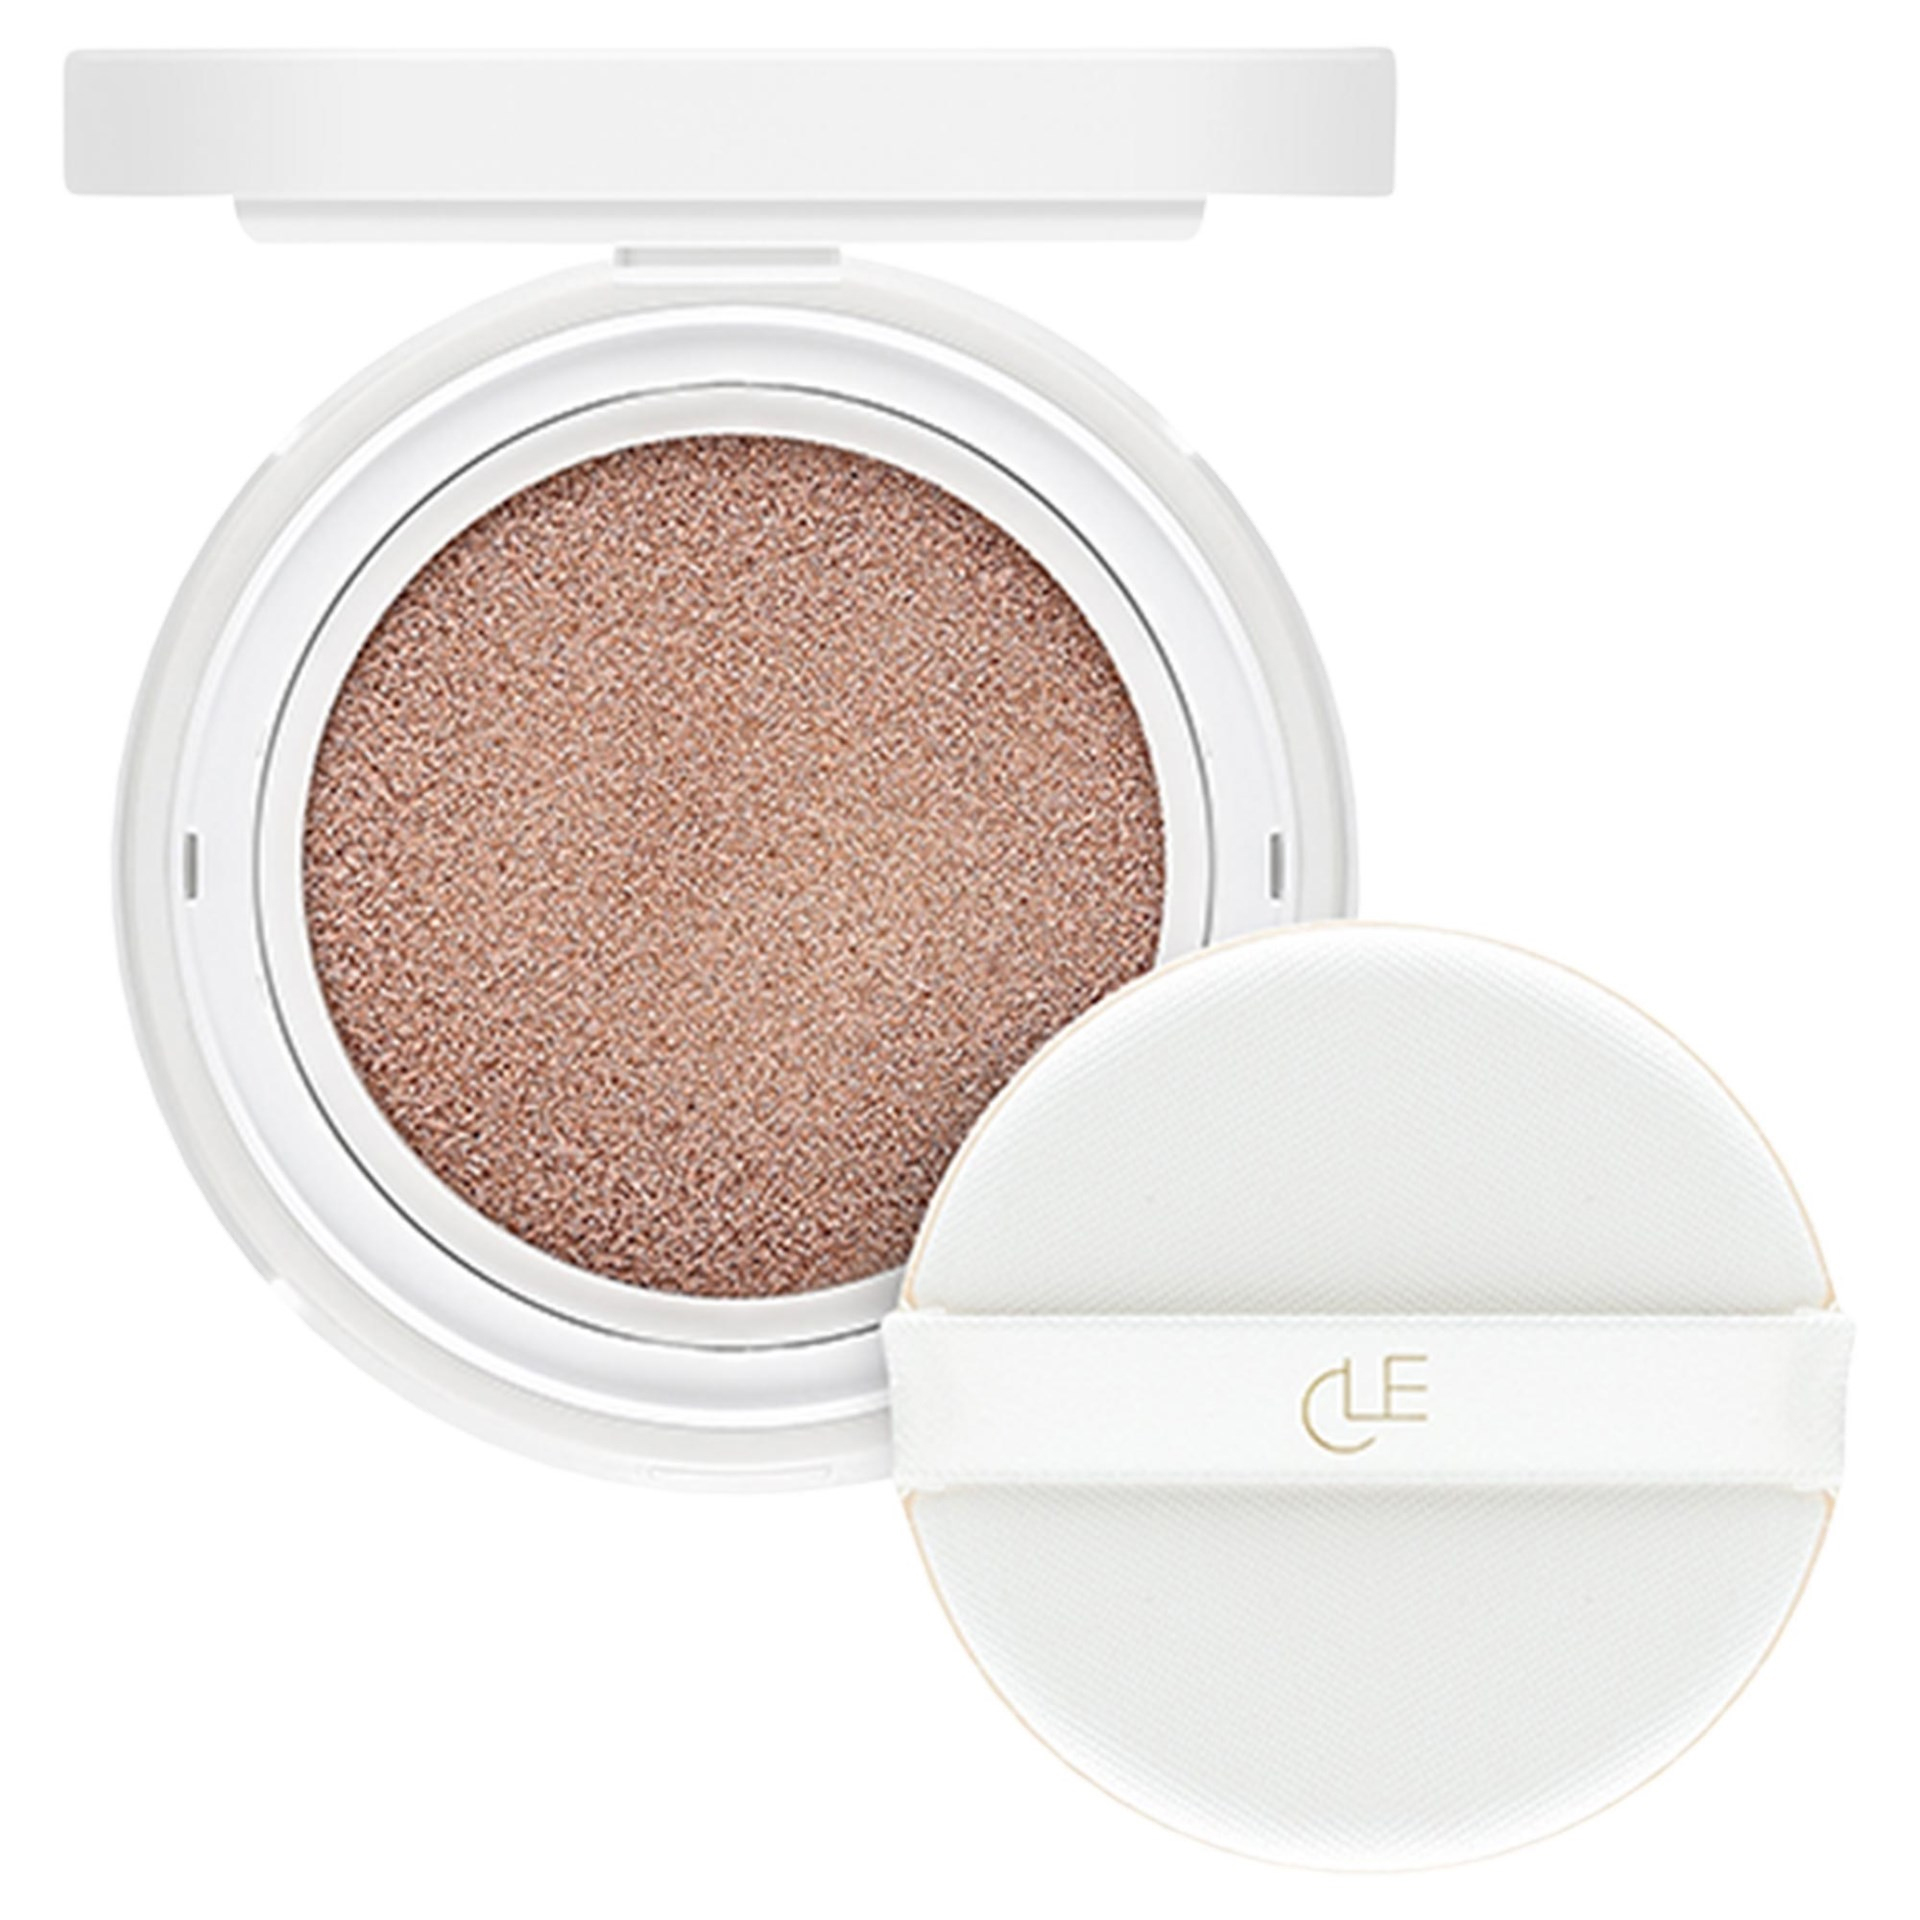 Cle Cosmetics Essence Moonlighter Cushion Apricot Tinge